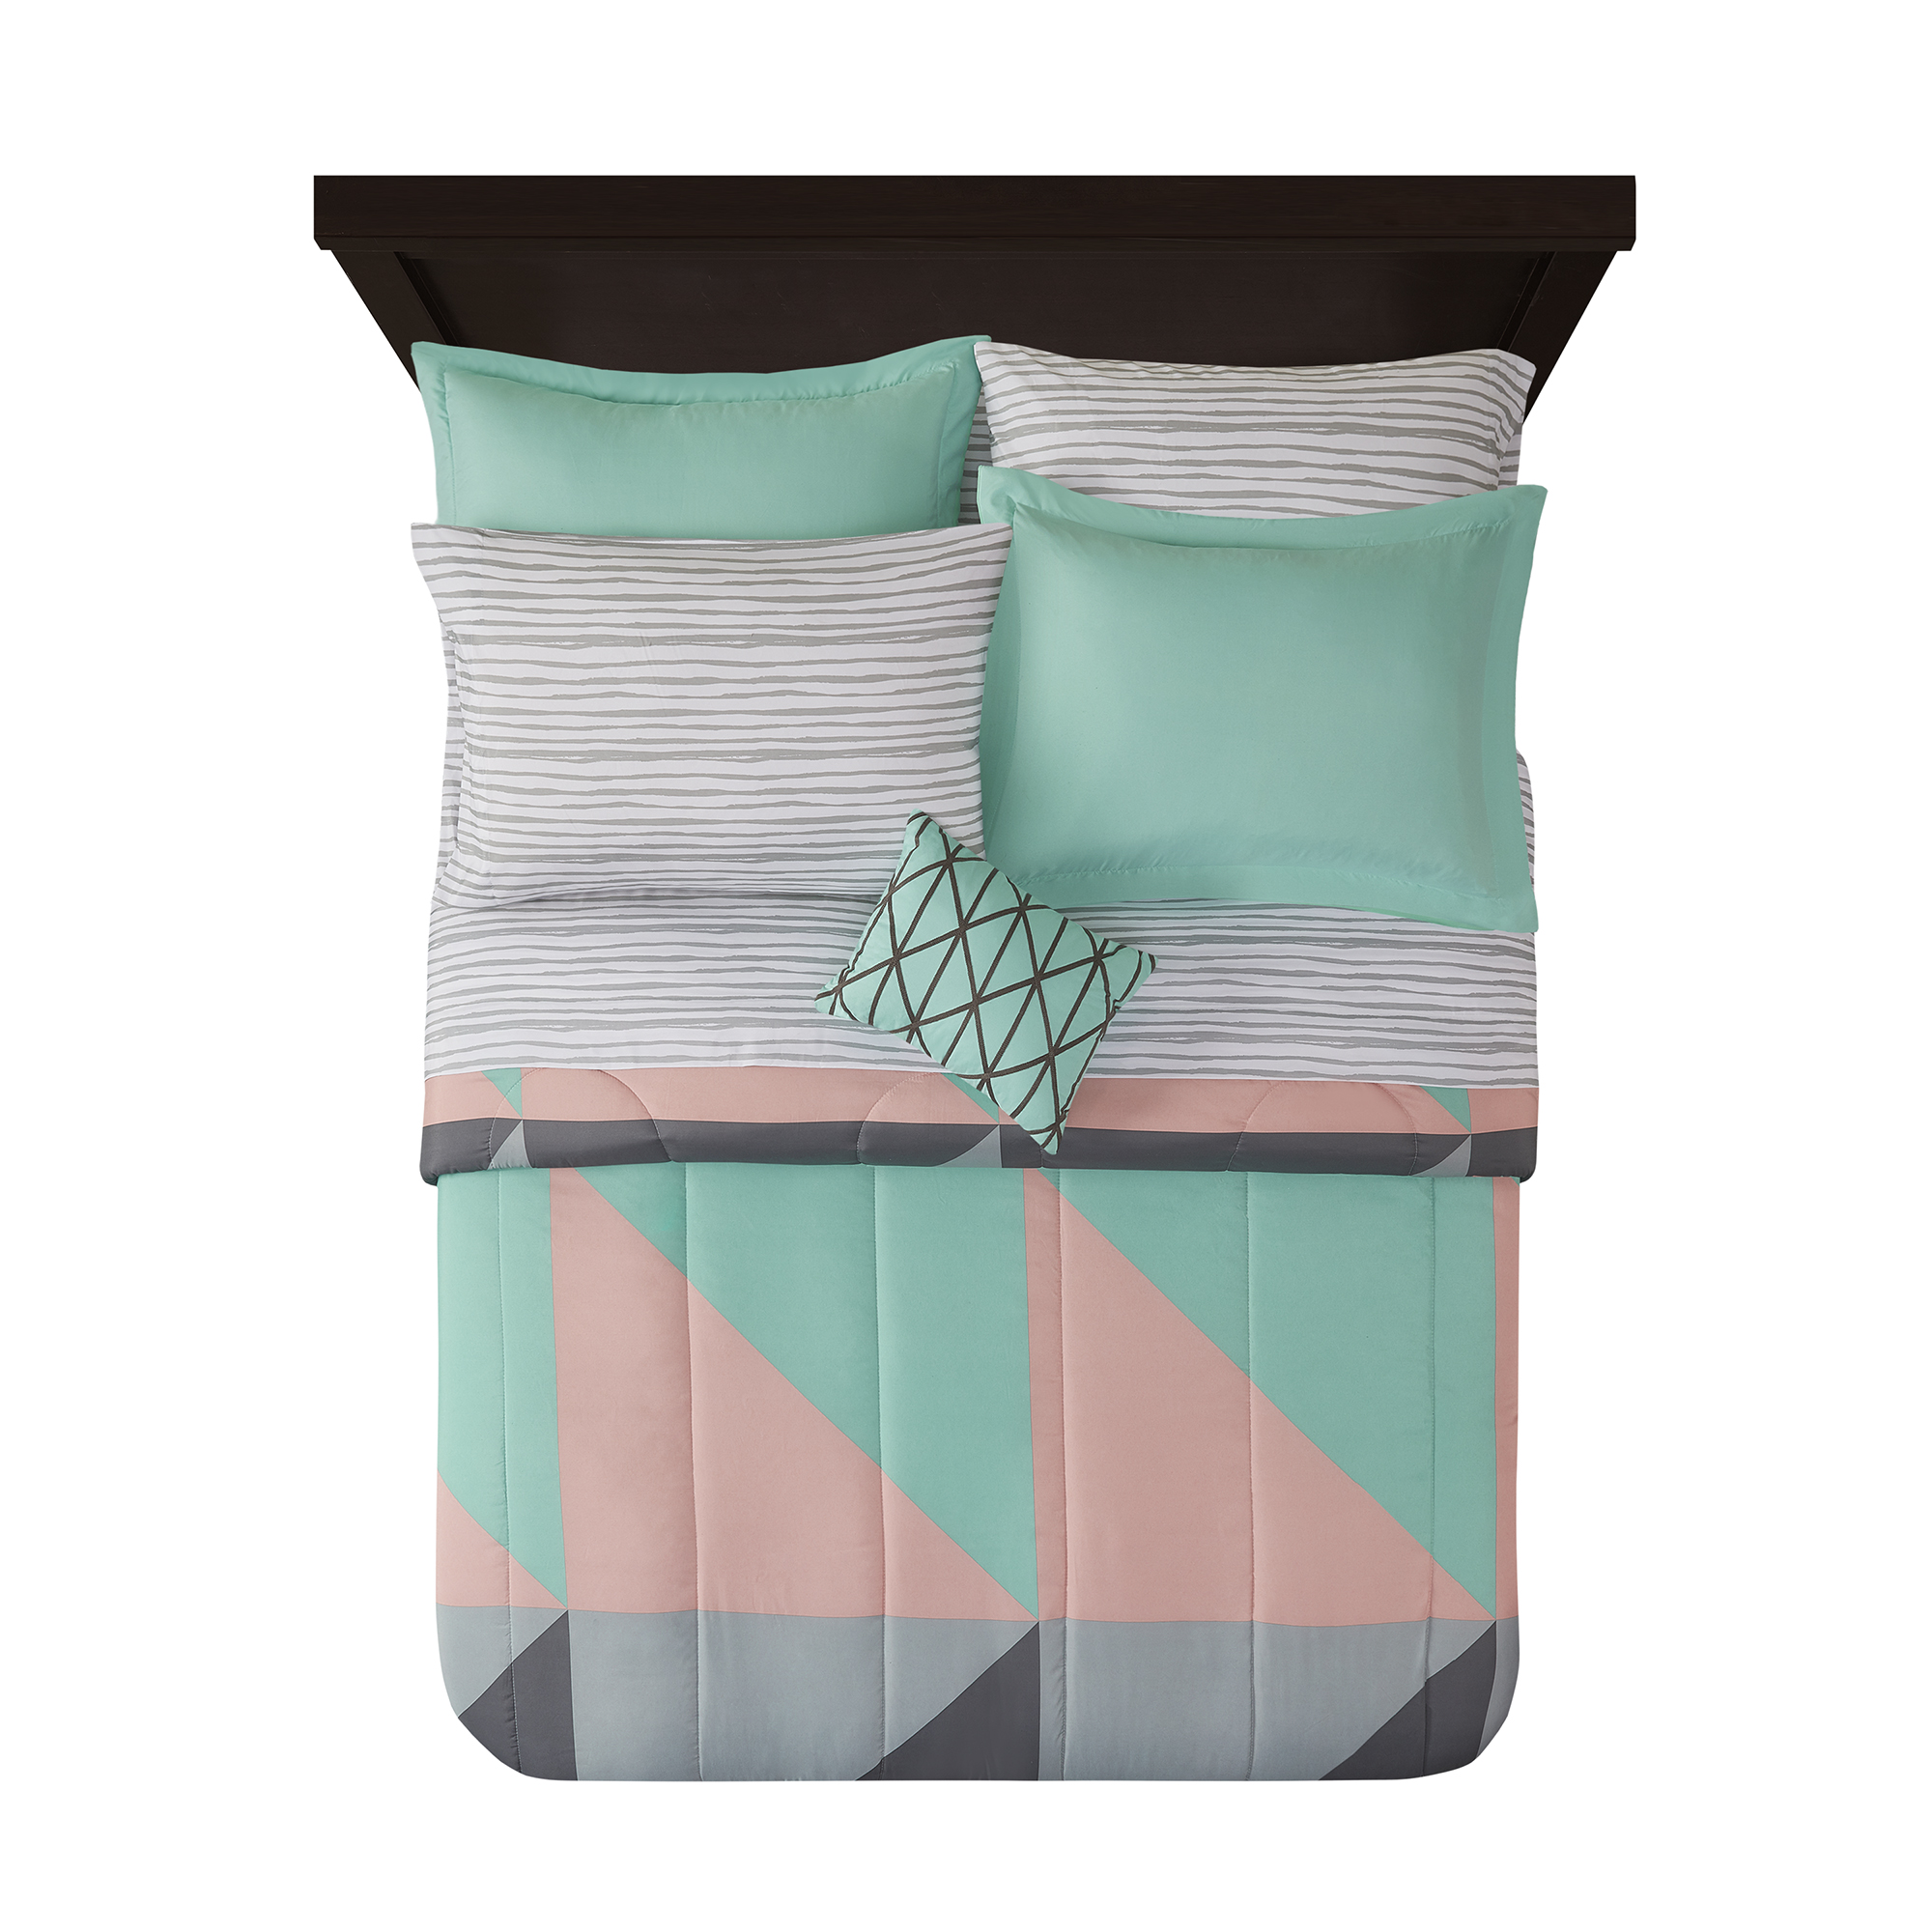 Mainstays Gray and Teal Geometric 8 Piece Bed in a Bag Comforter Set With Sheets, Queen - image 2 of 8